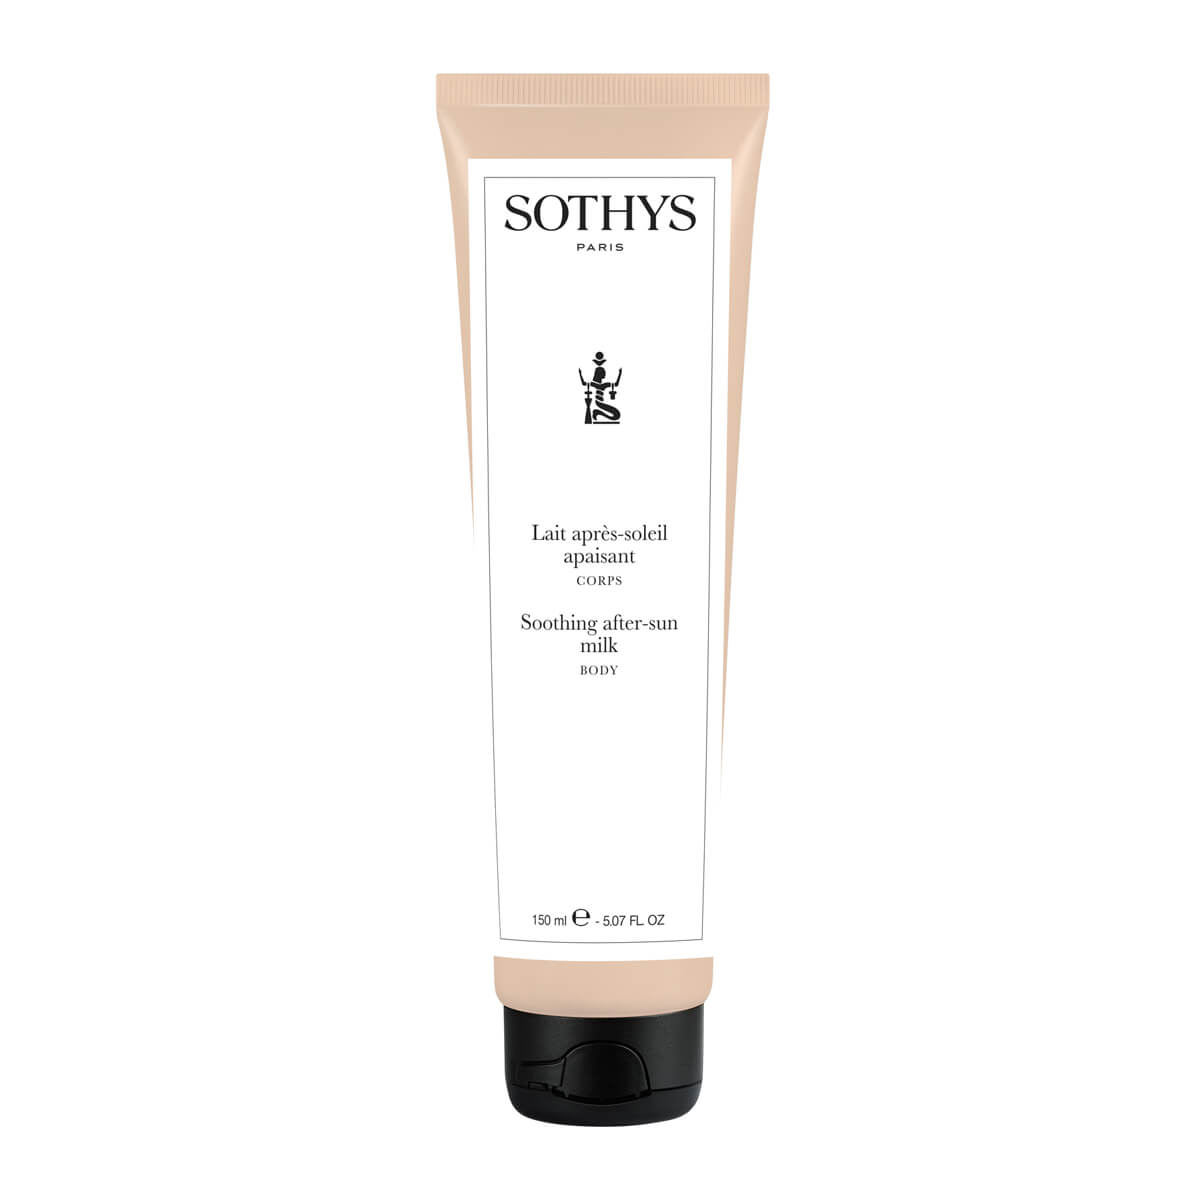 Sothys Soothing After Sun Body Milk